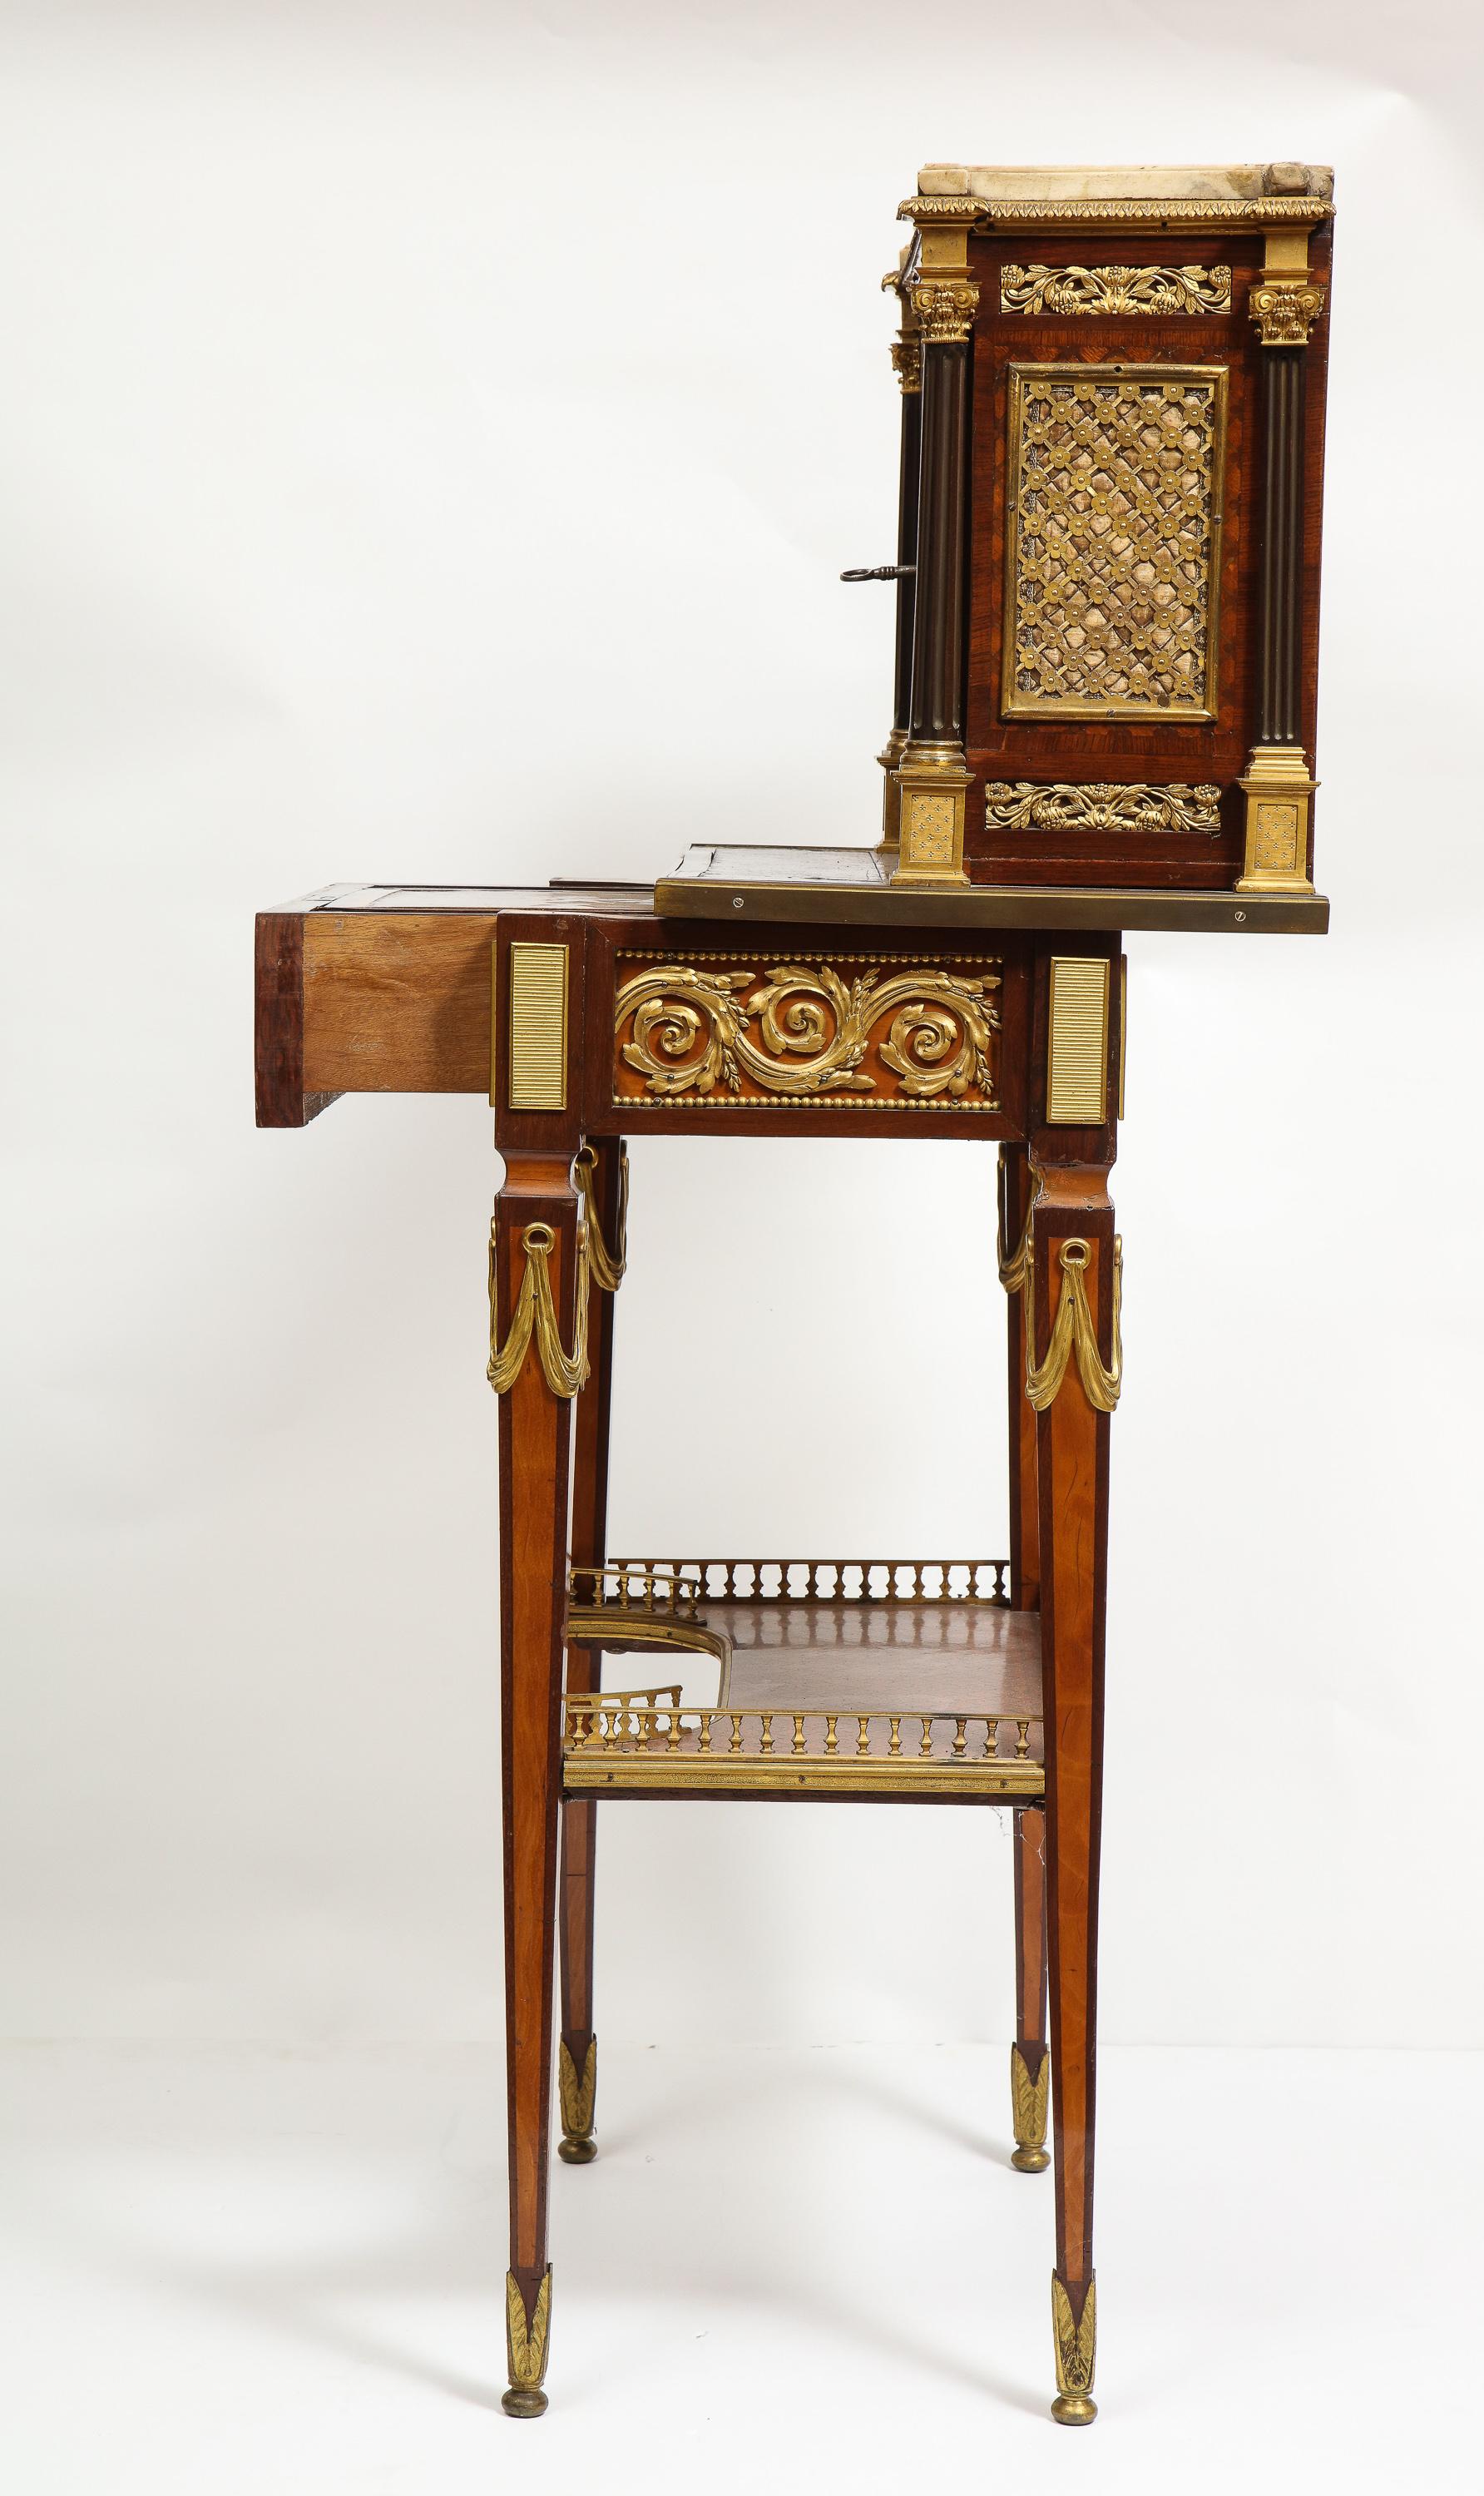 19th Century French Ormolu Mounted Mahogany Bonheur Du Jour, Attributed to Henry Dasson